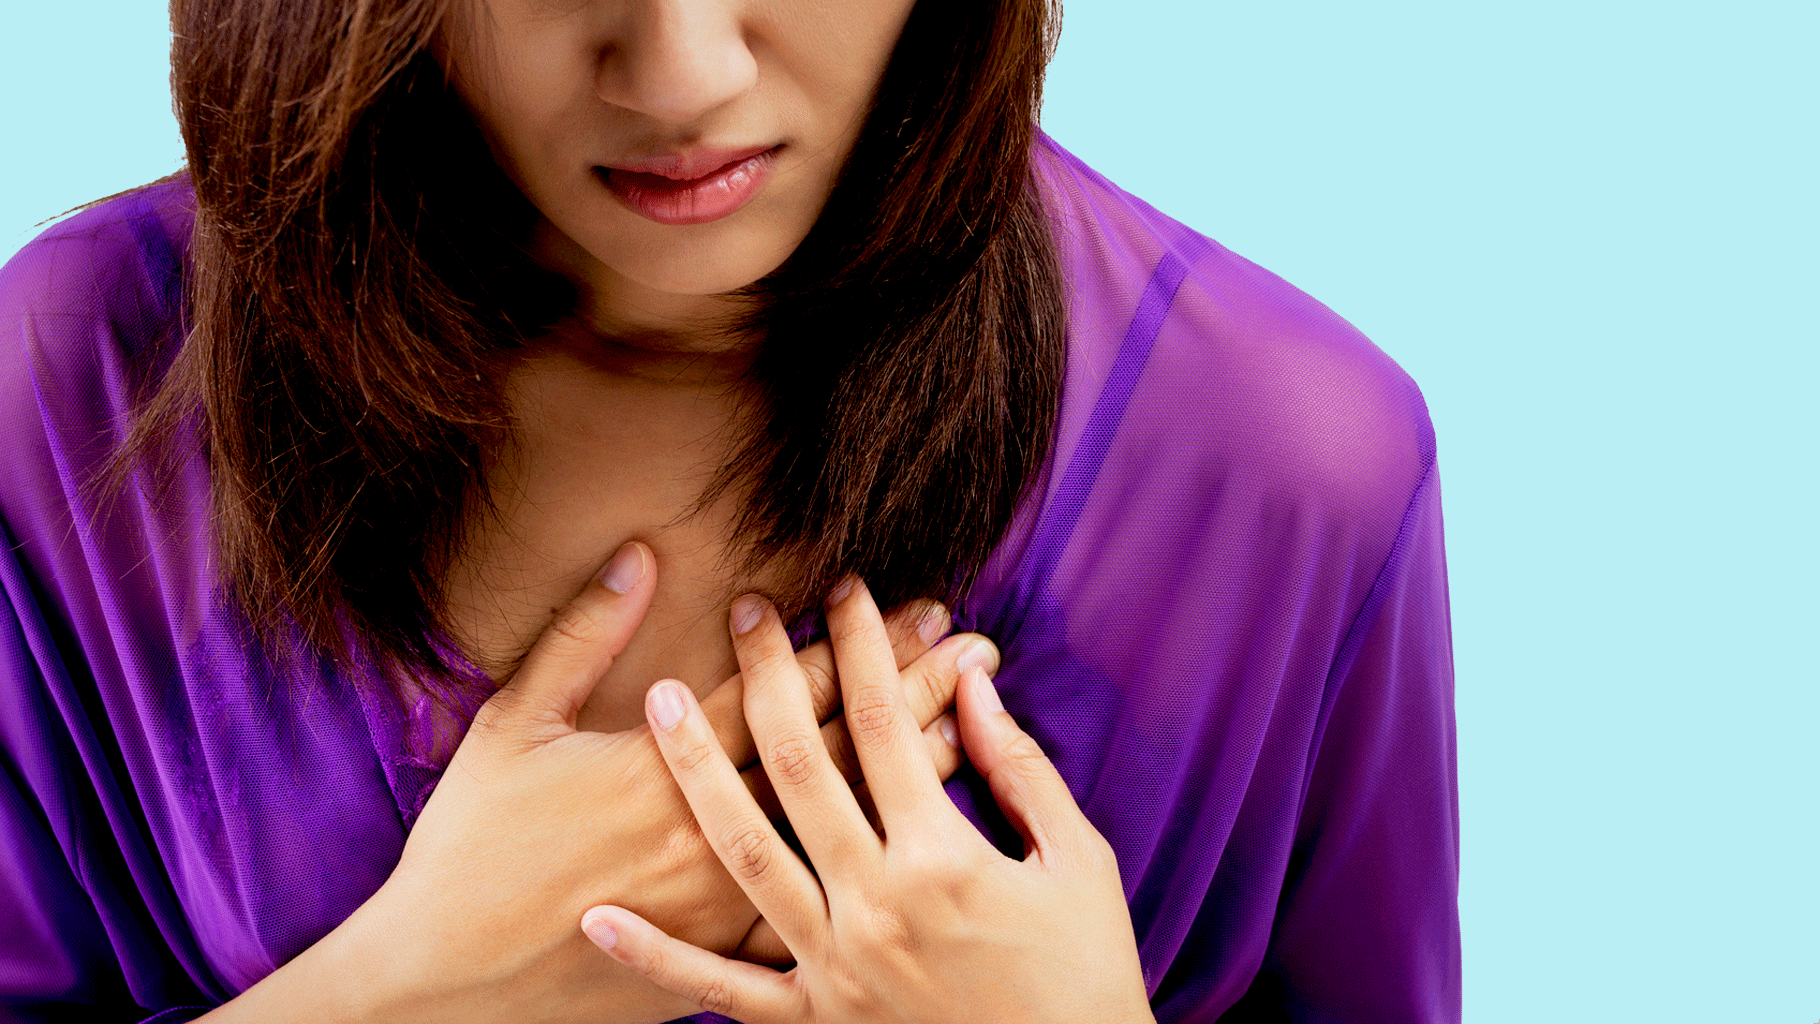 Depressed people could be at an increased risk of developing irregular heartbeat, says a study.